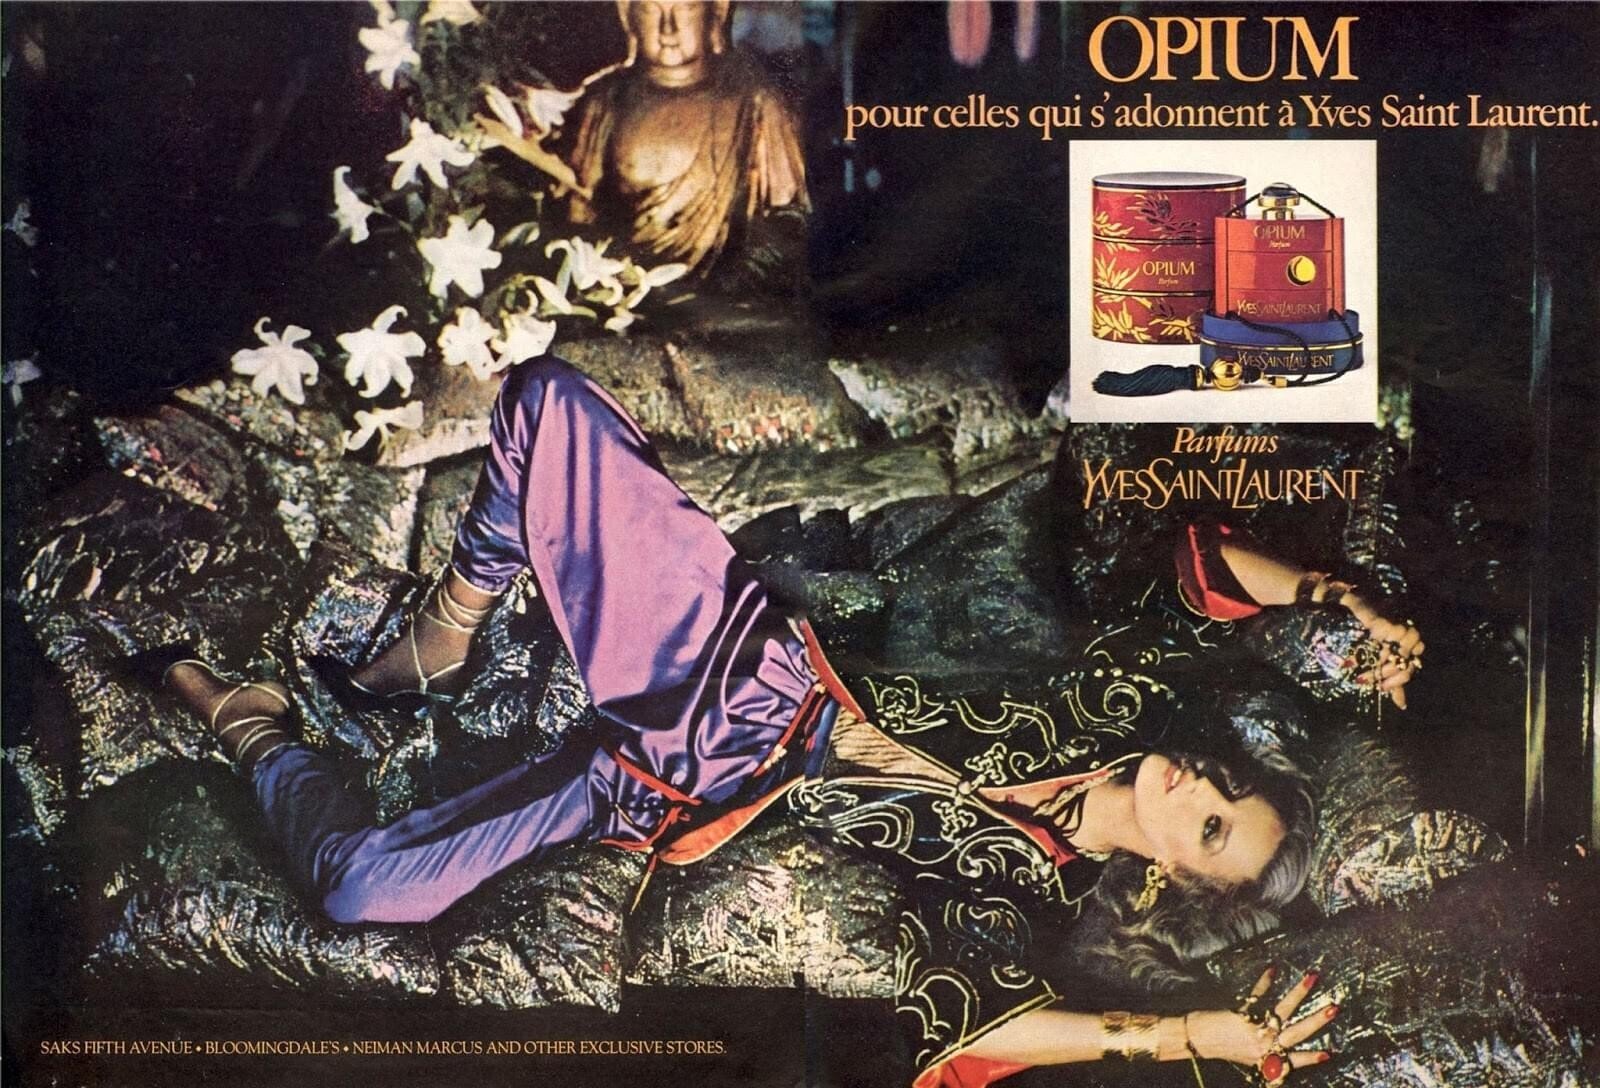 American model Jerry Hall in a 1977 advertisement for Yves Saint Laurent’s fragrance Opium. Photo: Handout